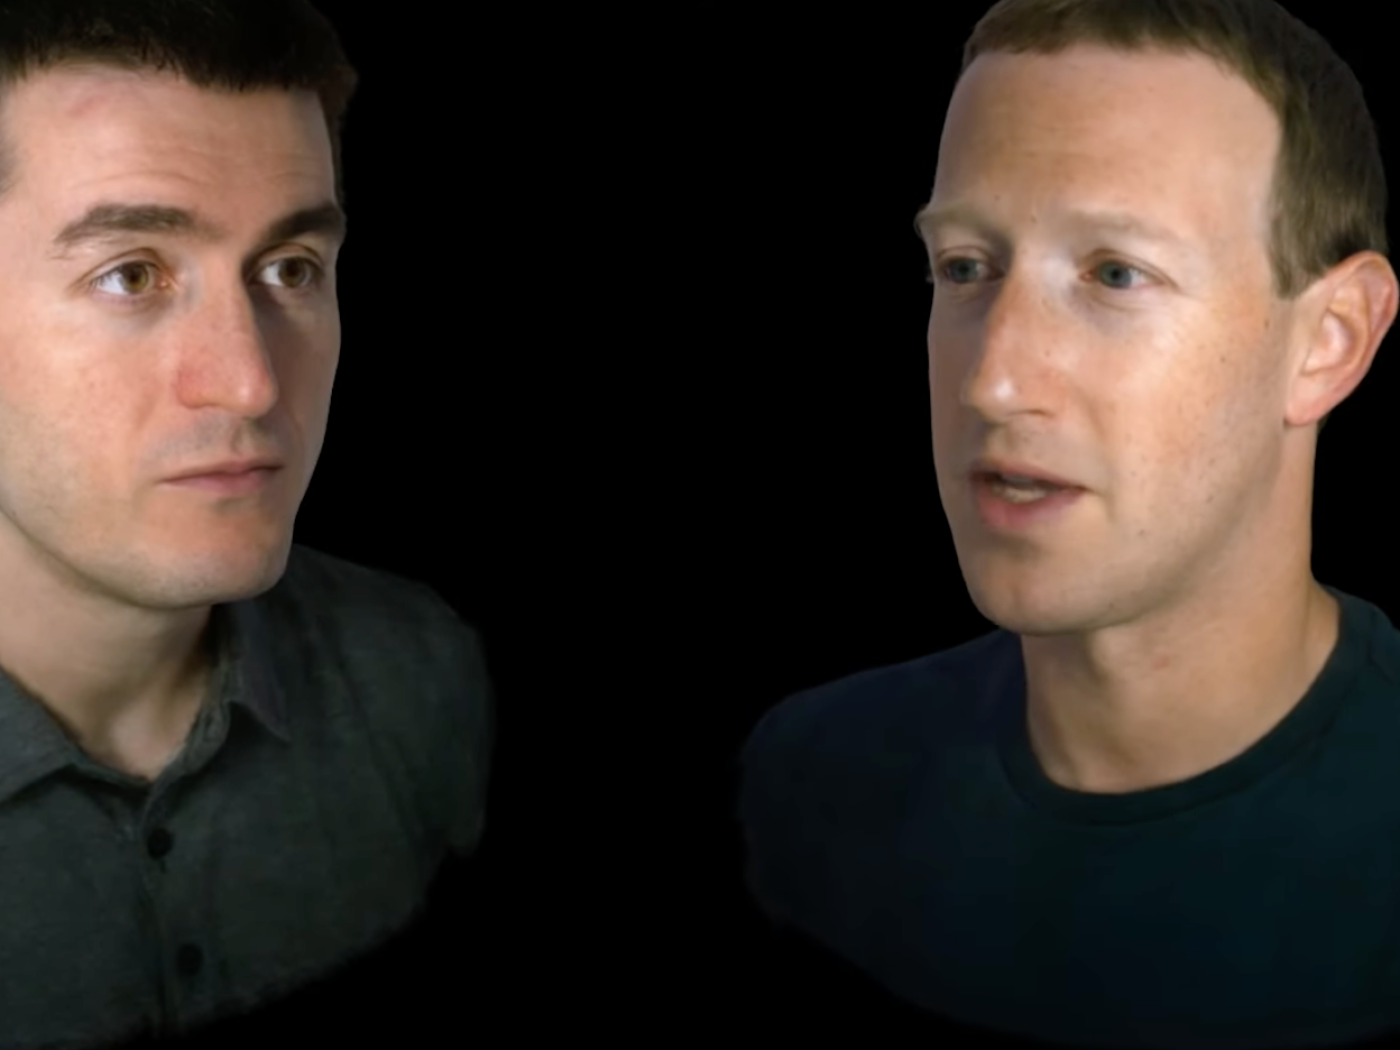 Lex Fridman hosted Mark Zuckerberg in their first ever podcast with their  photorealistic avatars. Lex Fridman describes it as one of the…